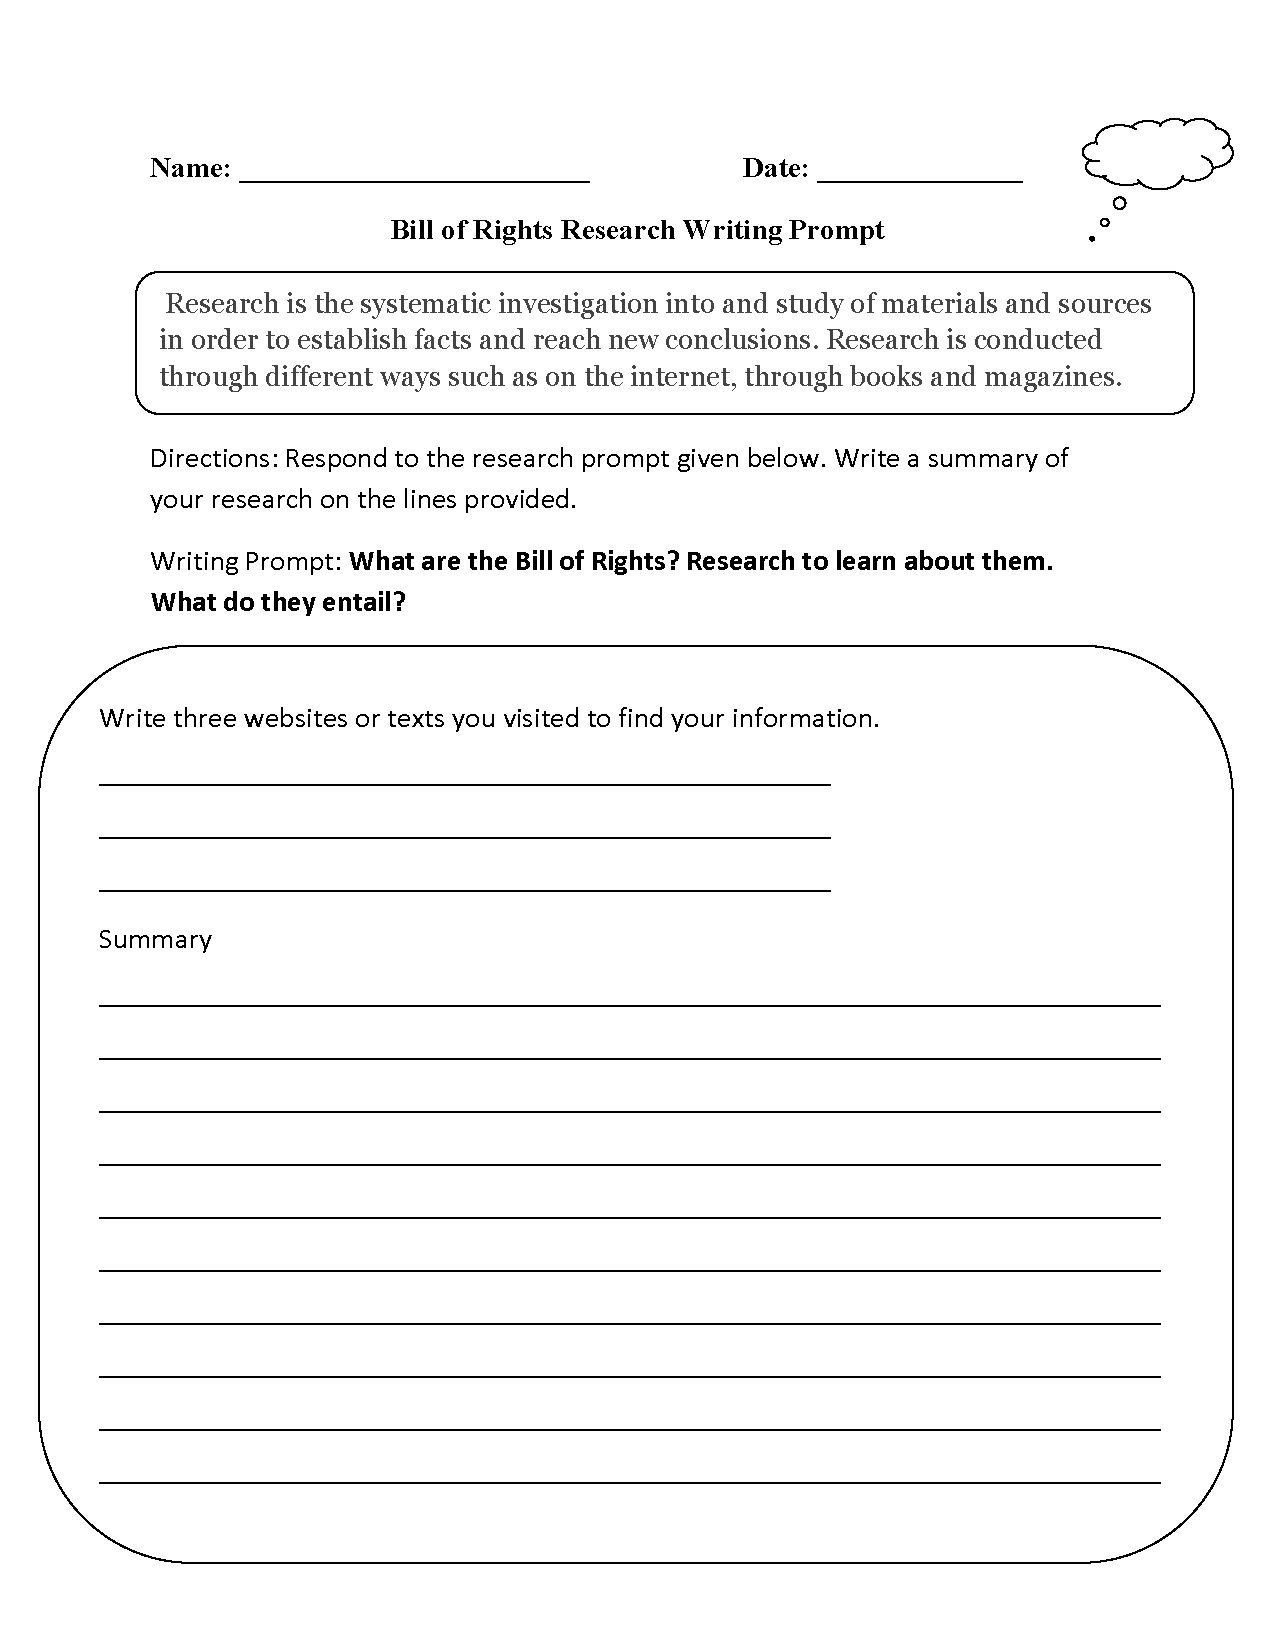 Bill of Rights Research Writing Prompts Worksheet